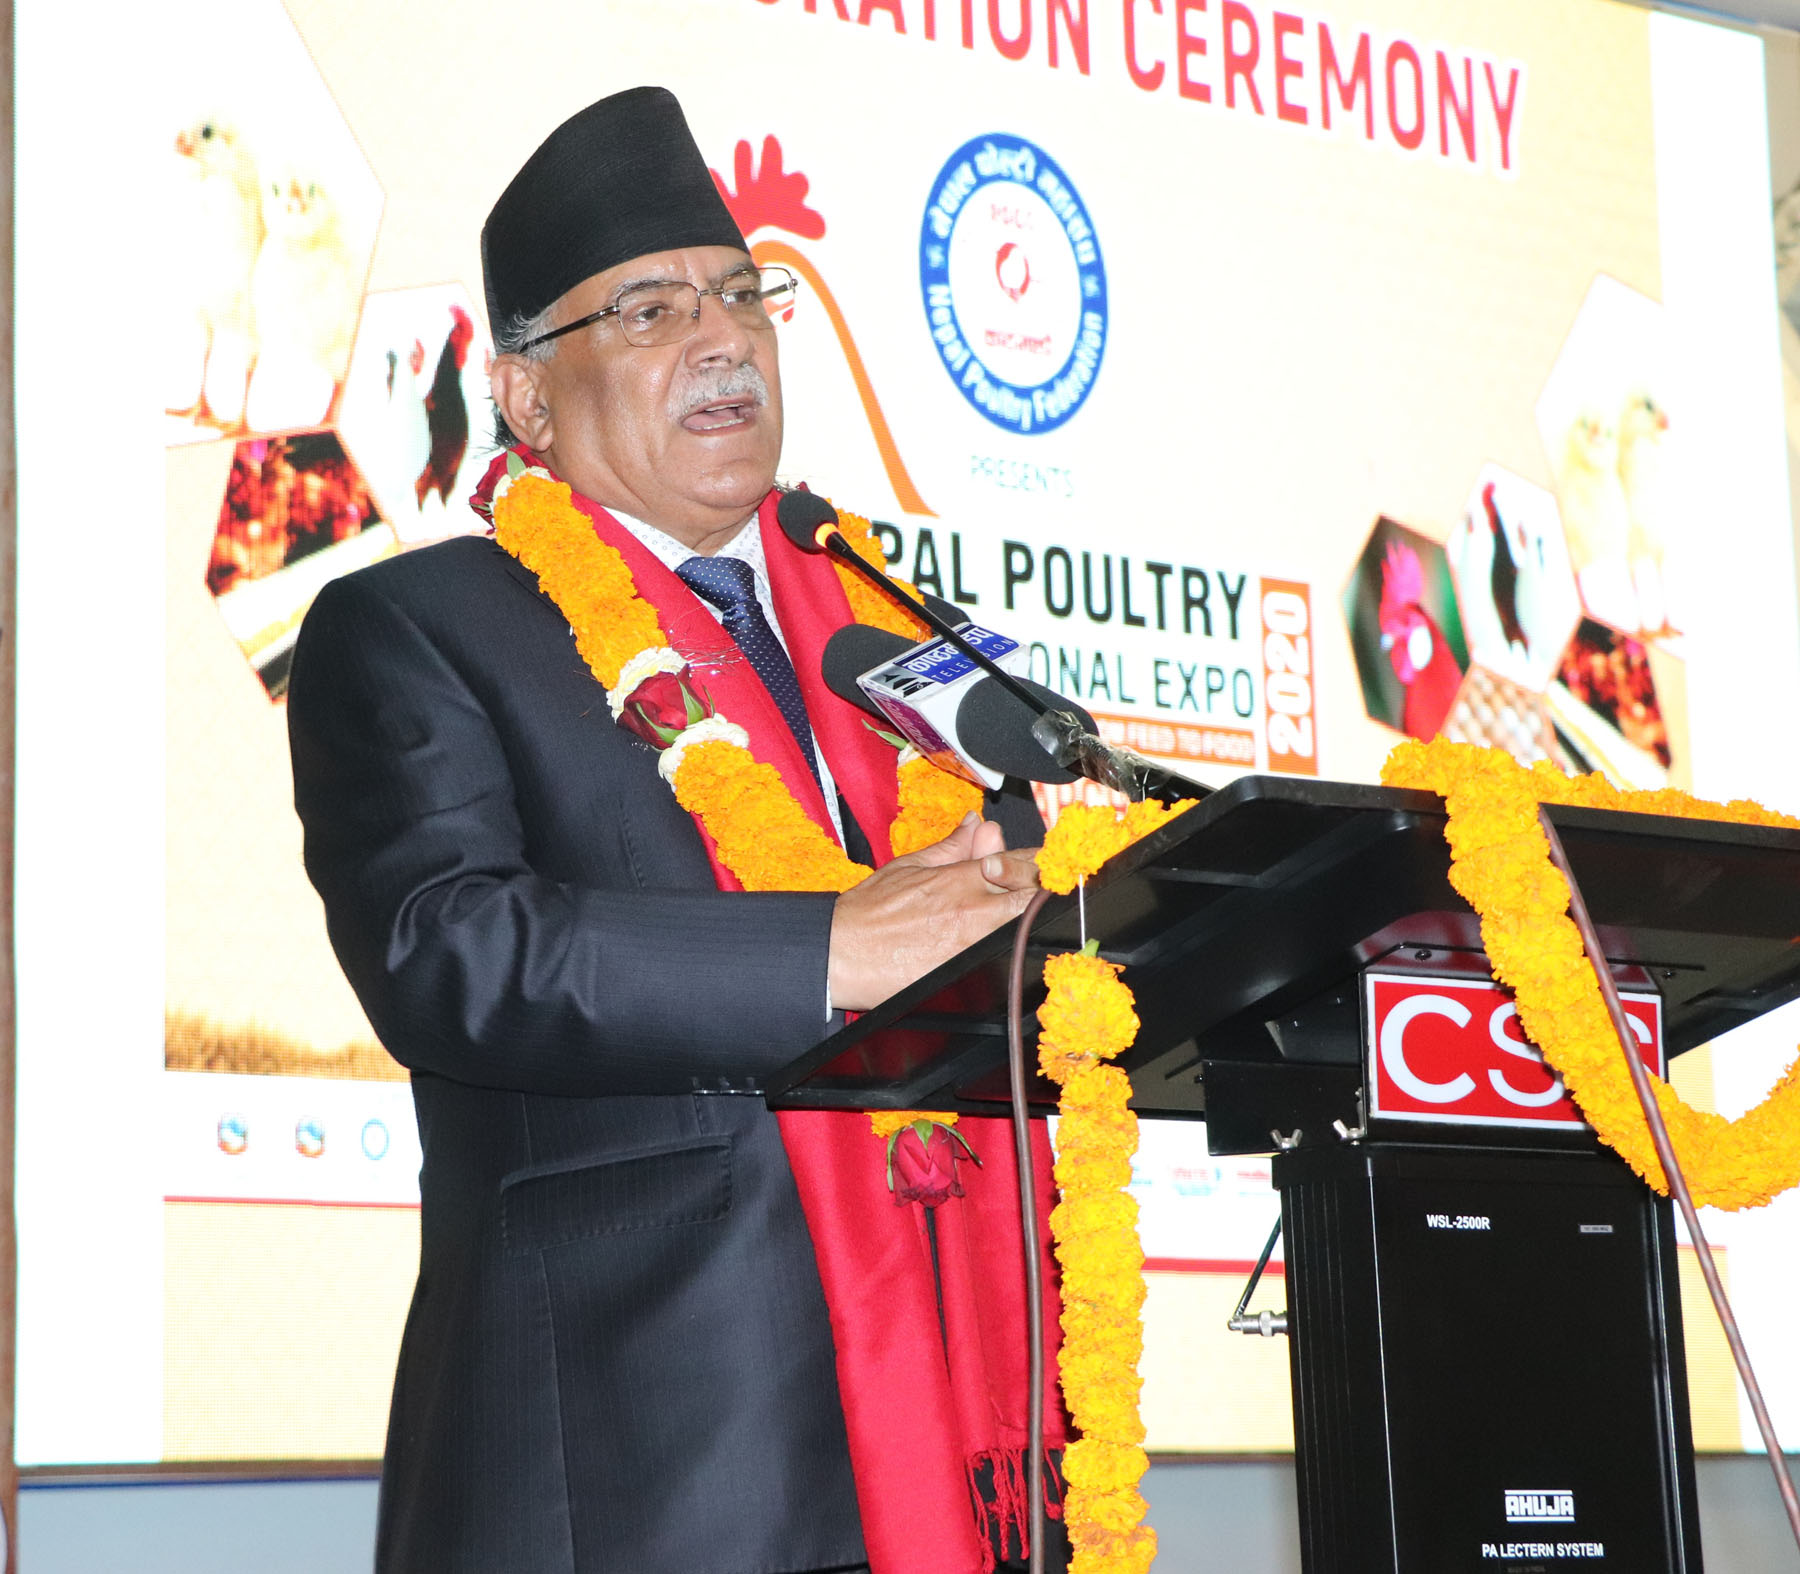 chair-prachanda-inaugurates-poultry-expo-says-nepal-entering-into-new-phase